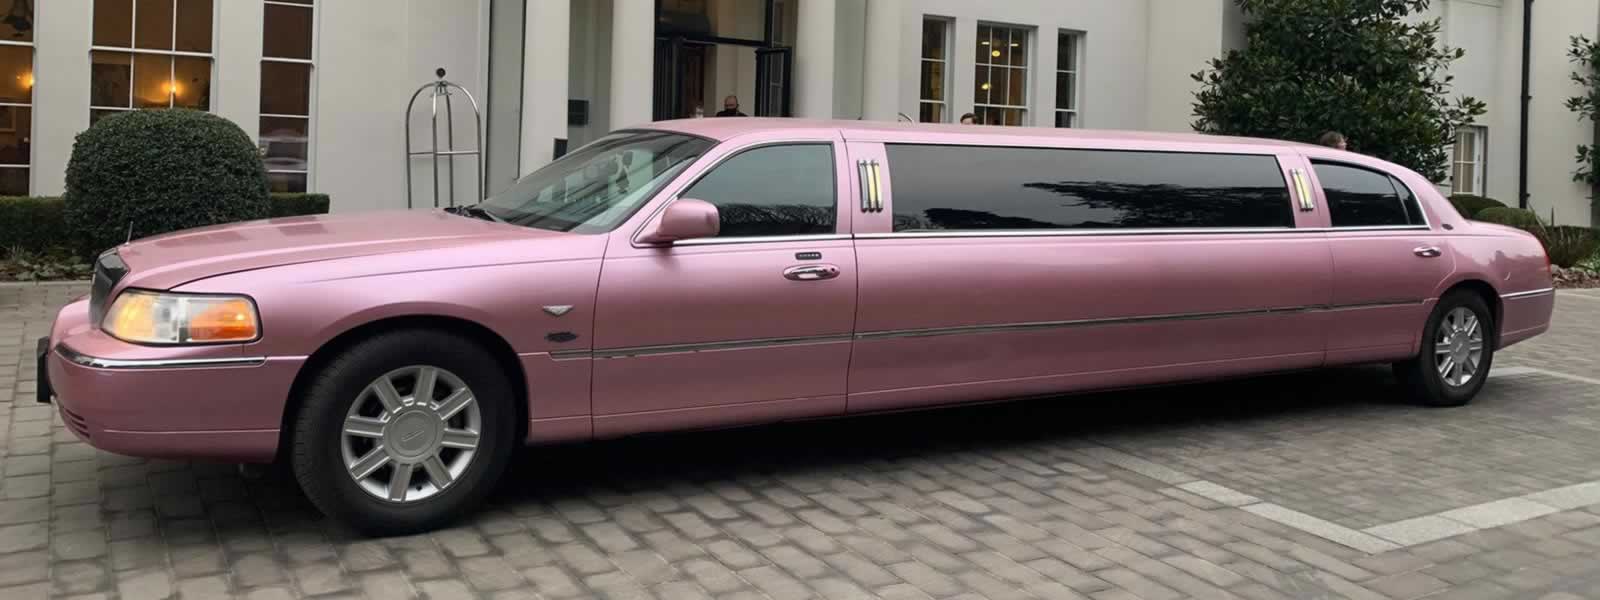 Pink Lincoln Stretch Limo